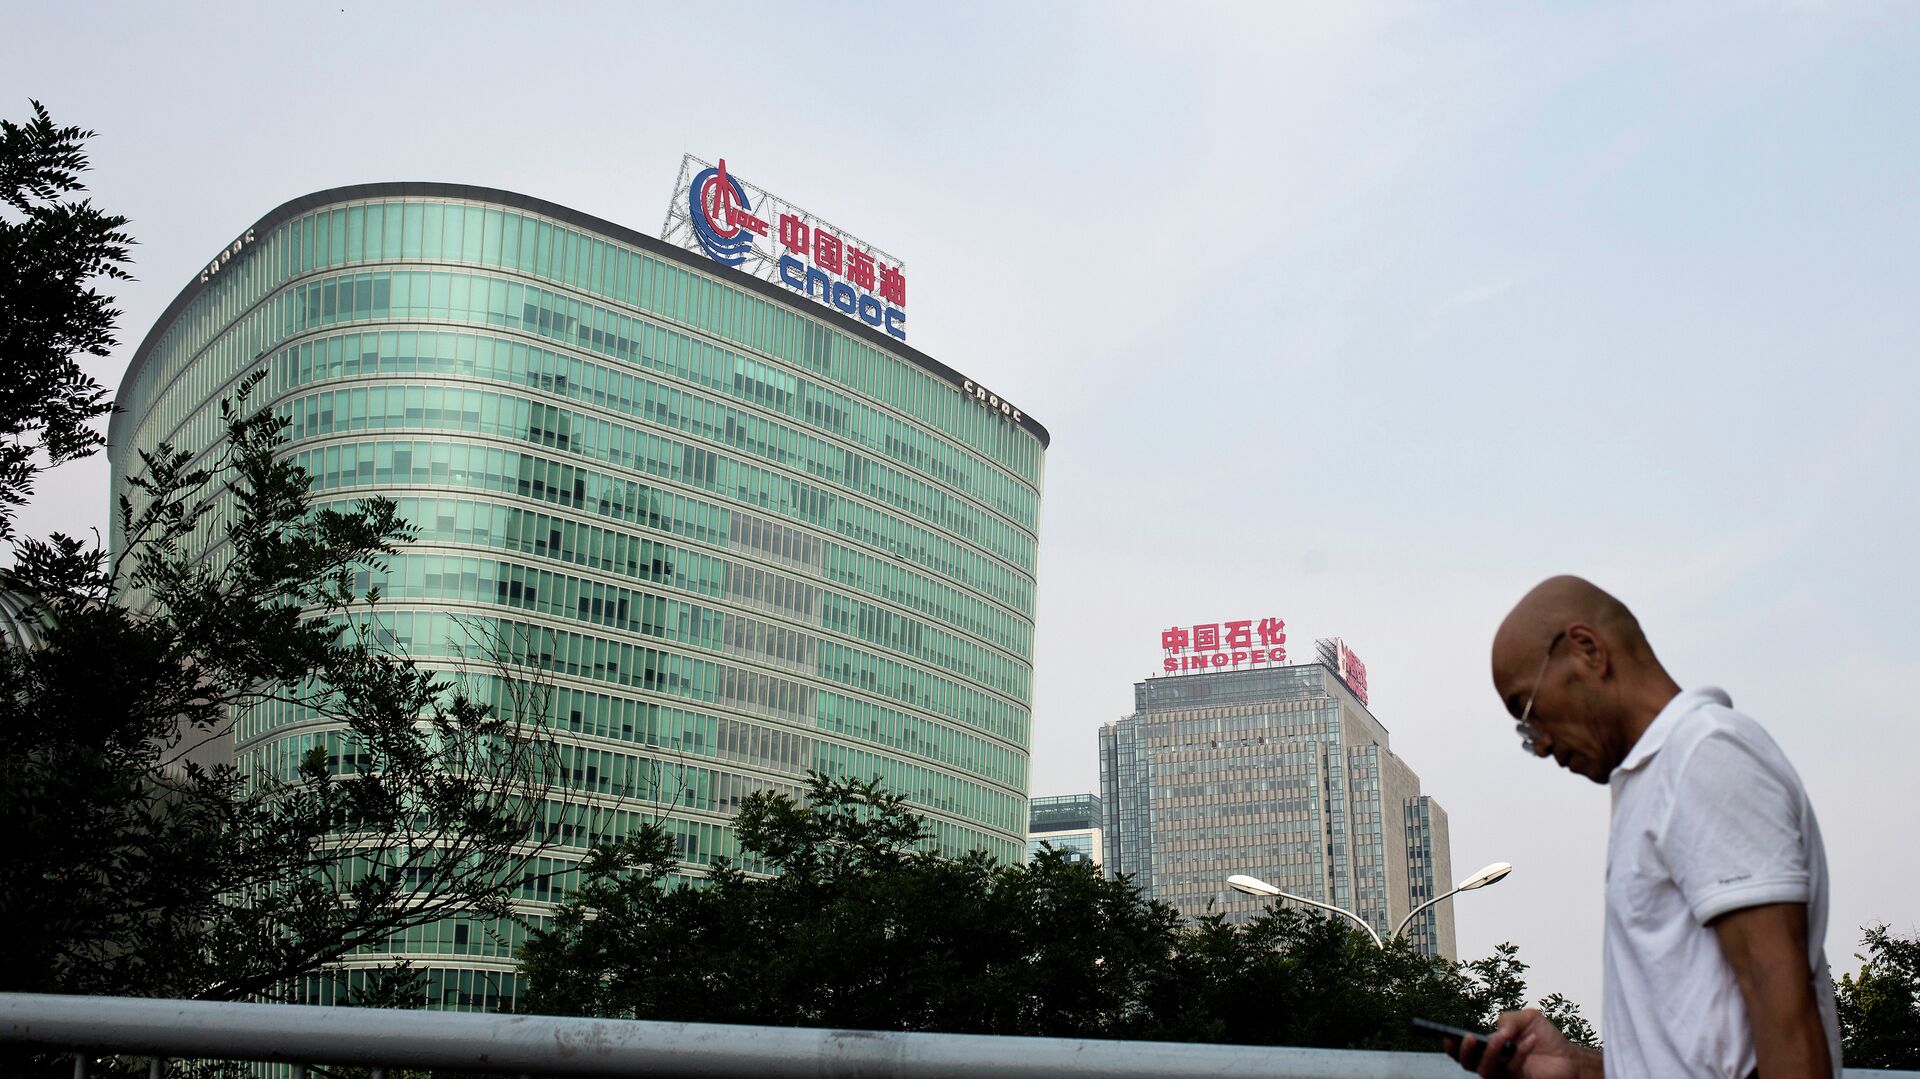 A man checks his mobile phone as he walks by buildings of China's state-owned companies, China National Offshore Oil Corp. (CNOOC), left, and China Petroleum & Chemical Corp. (Sinopec), in Beijing Monday, Sept. 14, 2015 - Sputnik International, 1920, 26.03.2023